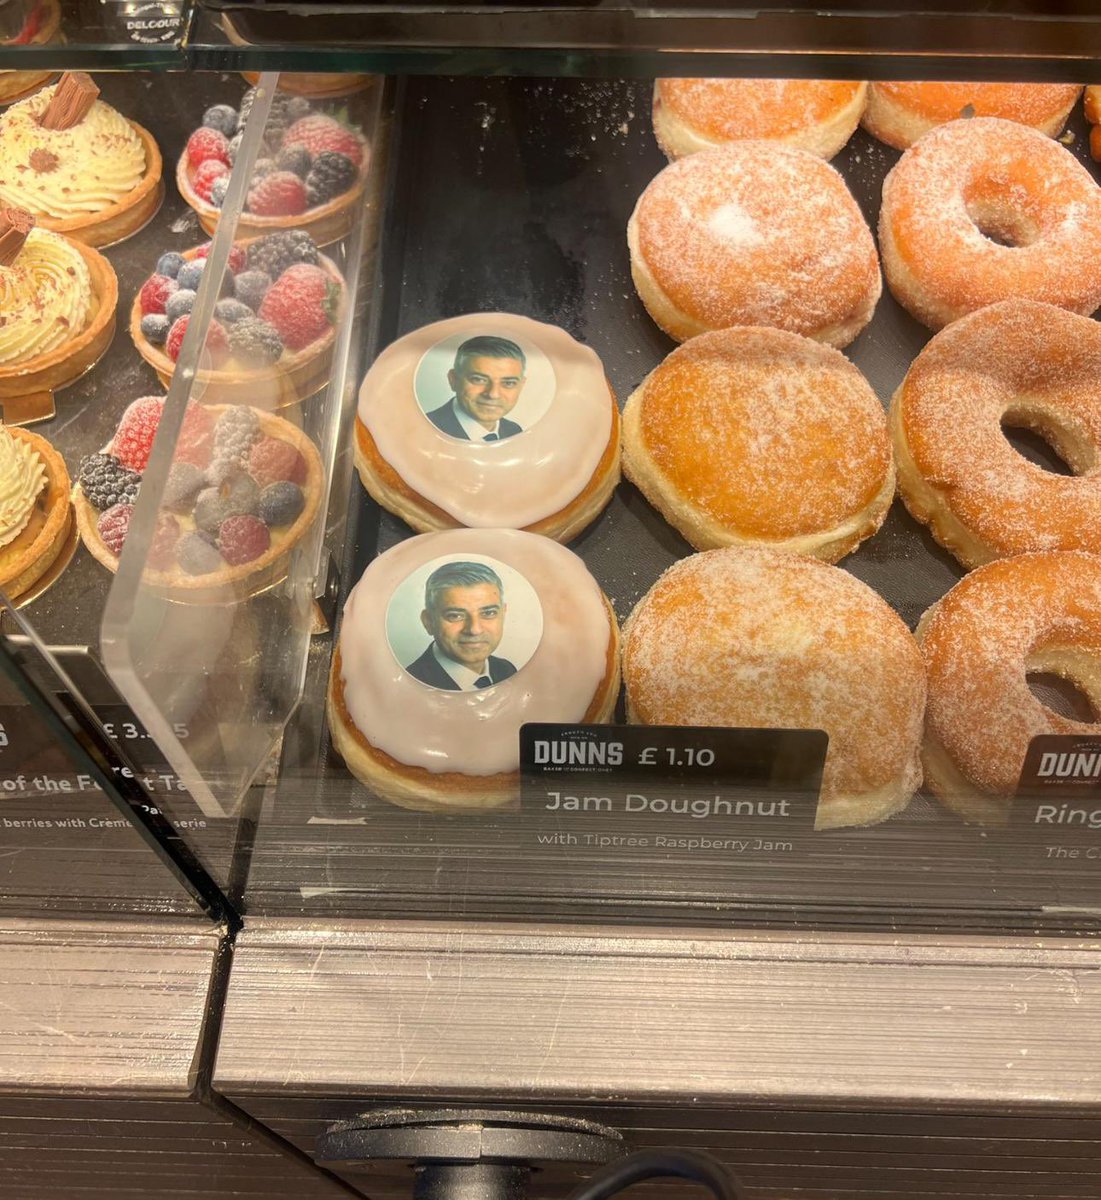 Bakeries up and down London cannot shift doughnuts with Khan’s image on them. Meanwhile, Susan’s are selling like hot cakes! #VoteConservative @Calum_McG @Councillorsuzie